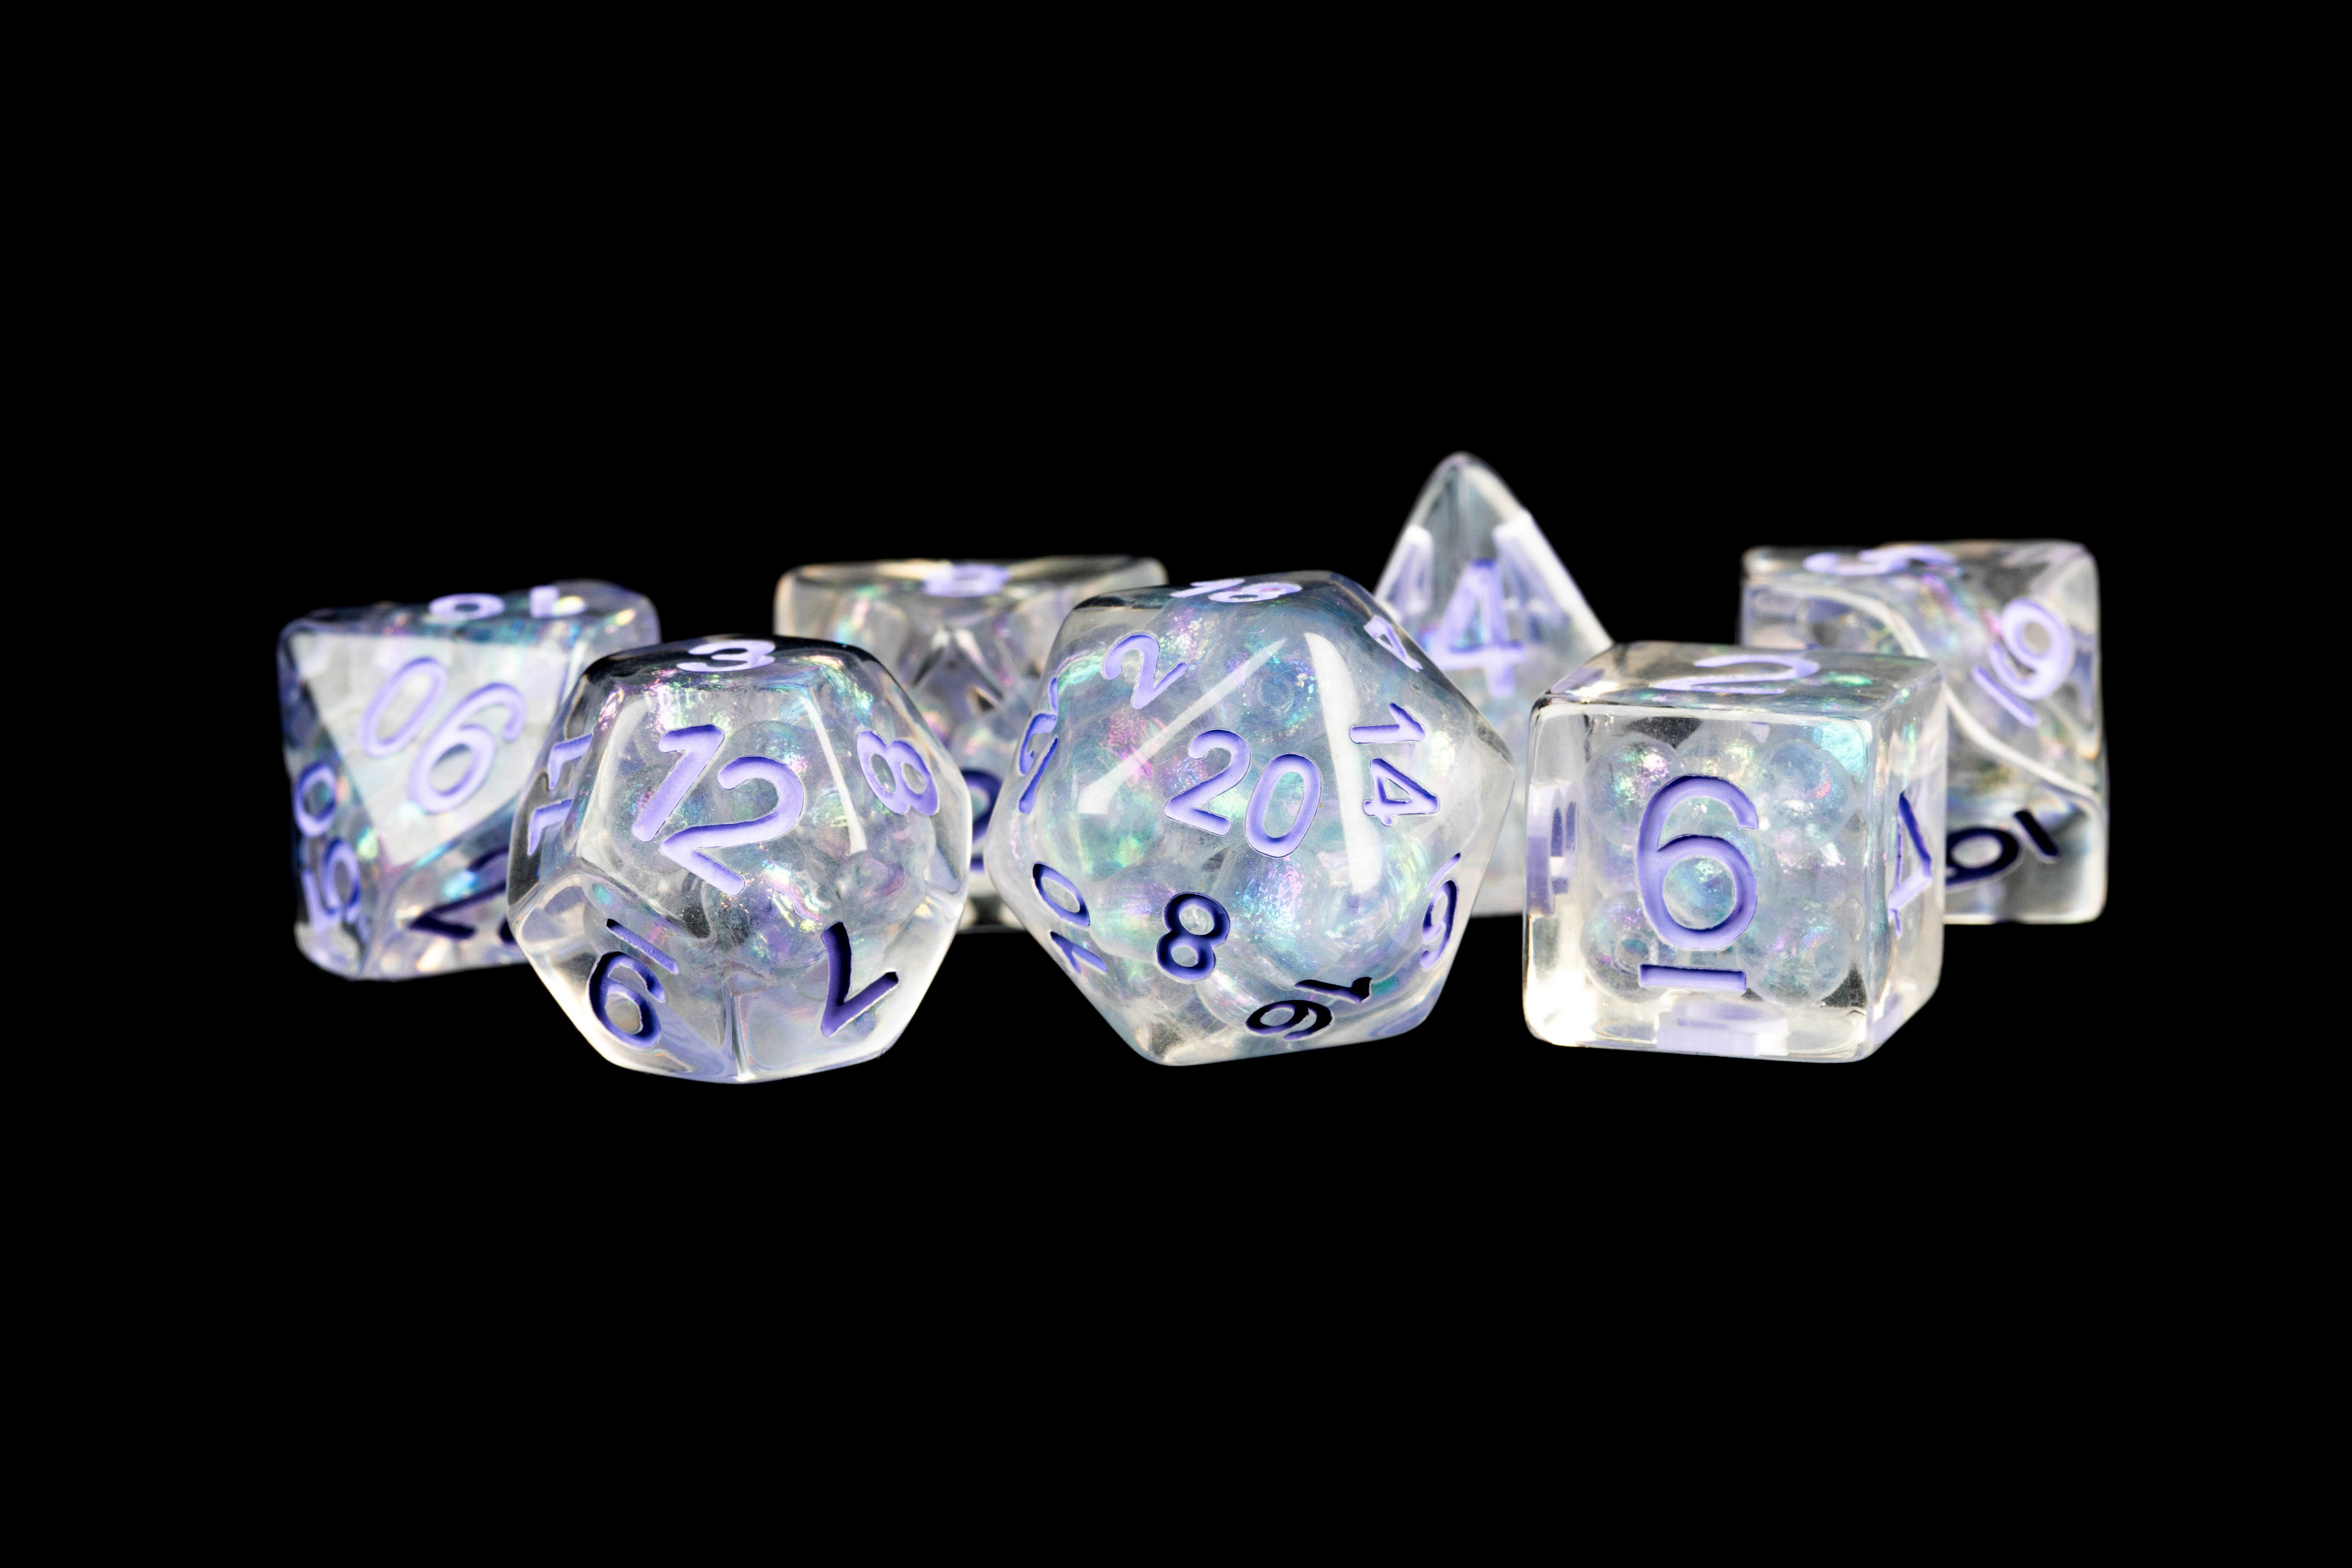 16mm Resin Poly Dice Set: Pearl with Purple Numbers (7)